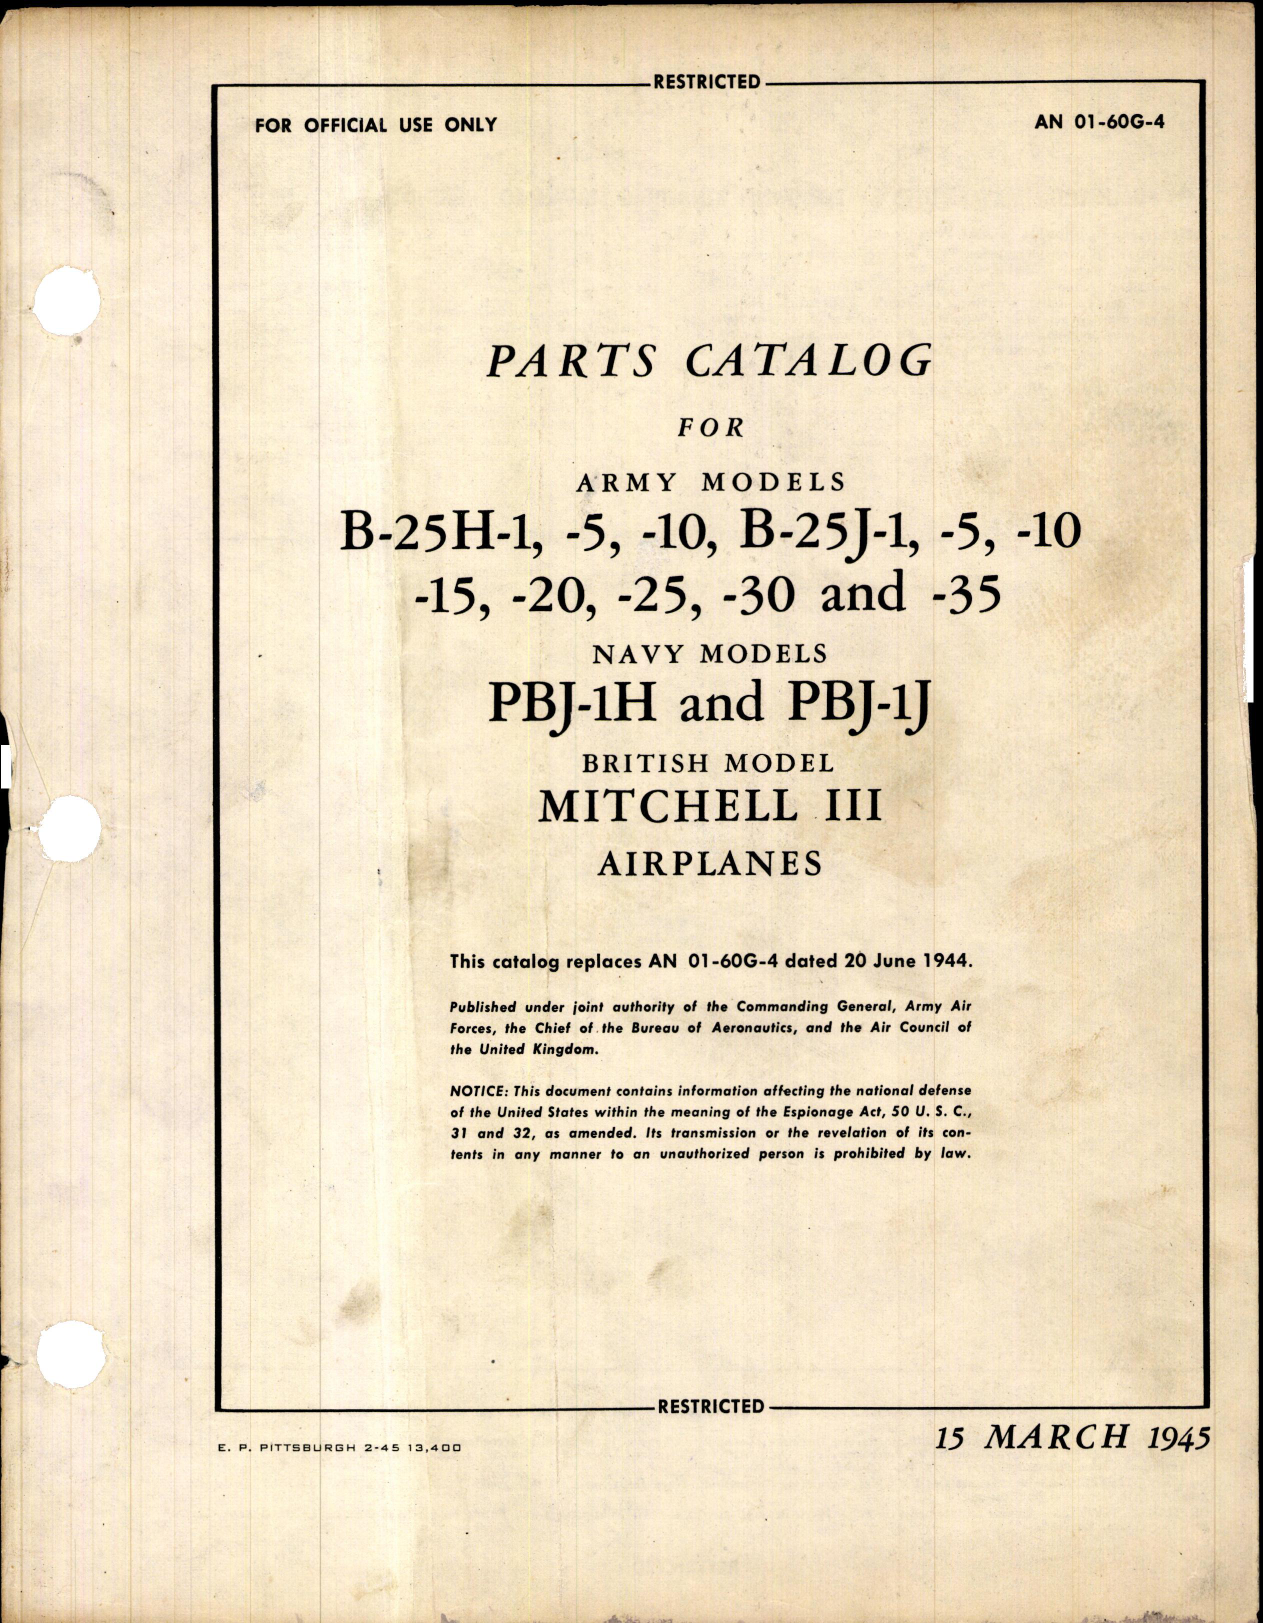 Sample page 1 from AirCorps Library document: Parts Catalog for B-25H-1, -5, -10, B-25J-1, -5, -10, -15, -20, -25, -30, and -35 and PBJ1-H and PBJ-1J